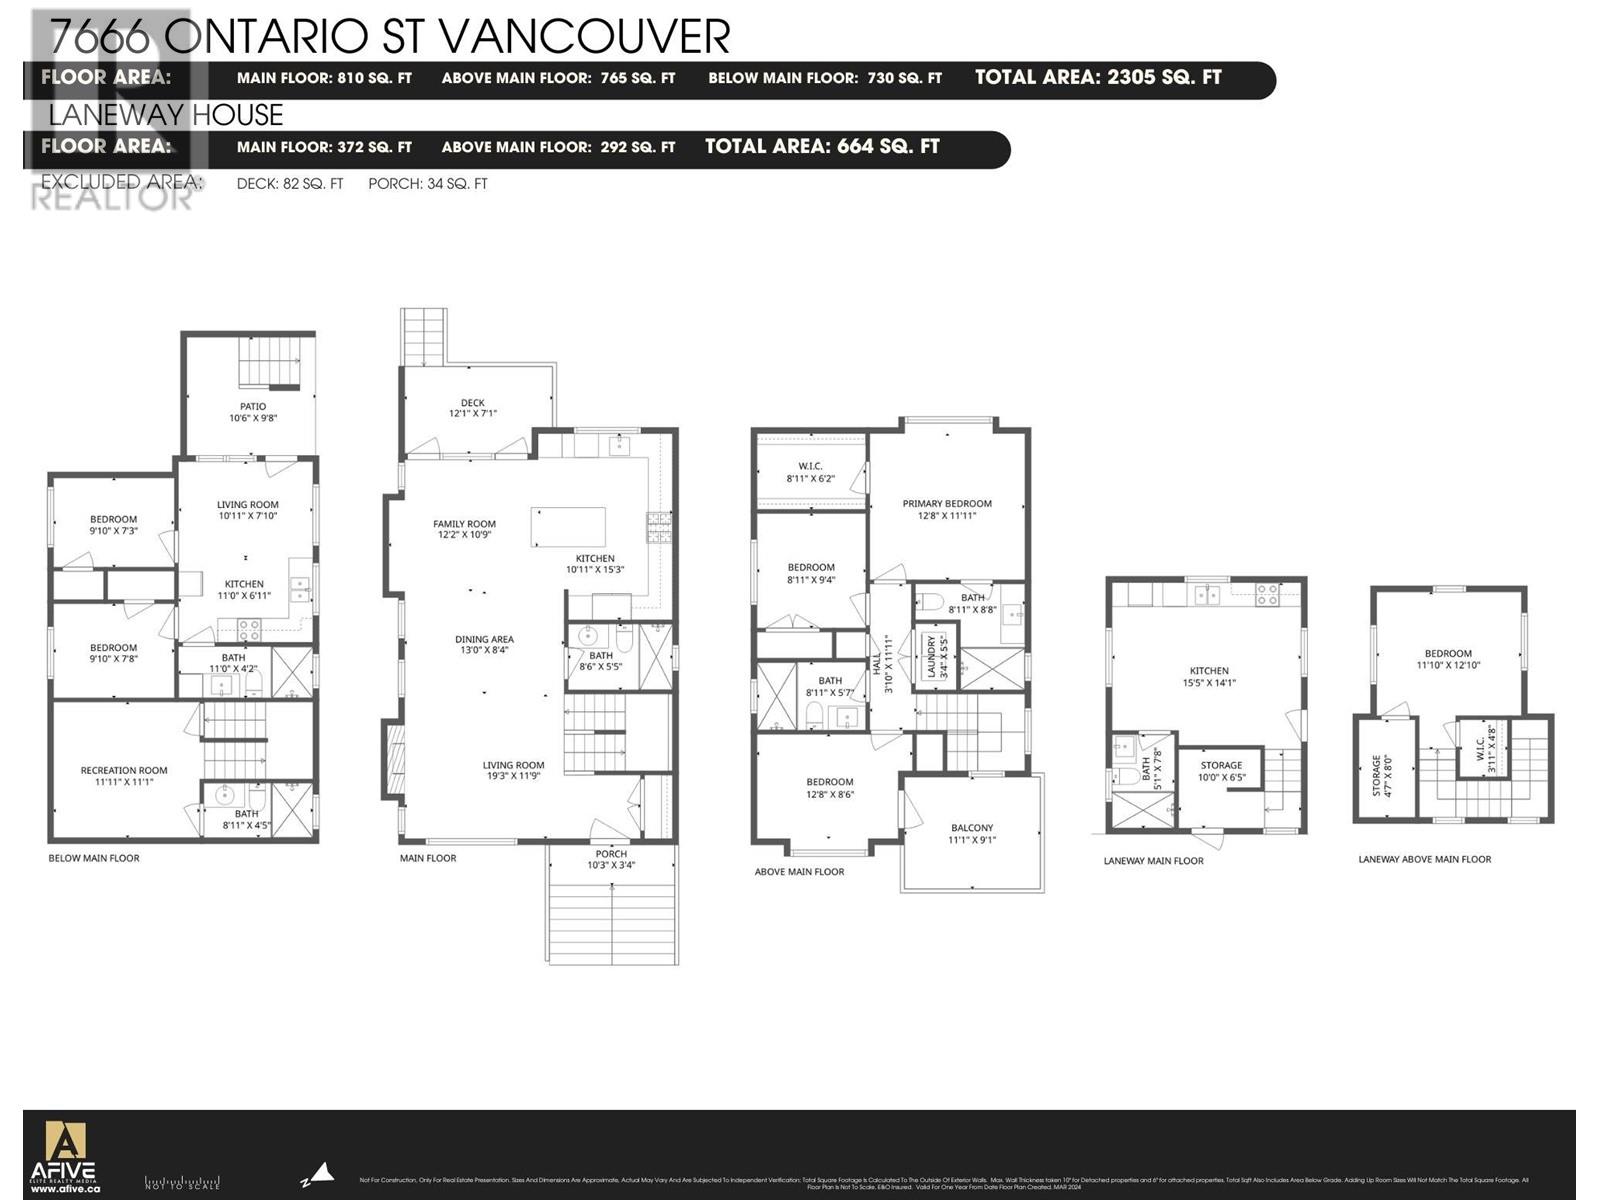 Listing Picture 26 of 26 : 7666 ONTARIO STREET, Vancouver / 溫哥華 - 魯藝地產 Yvonne Lu Group - MLS Medallion Club Member